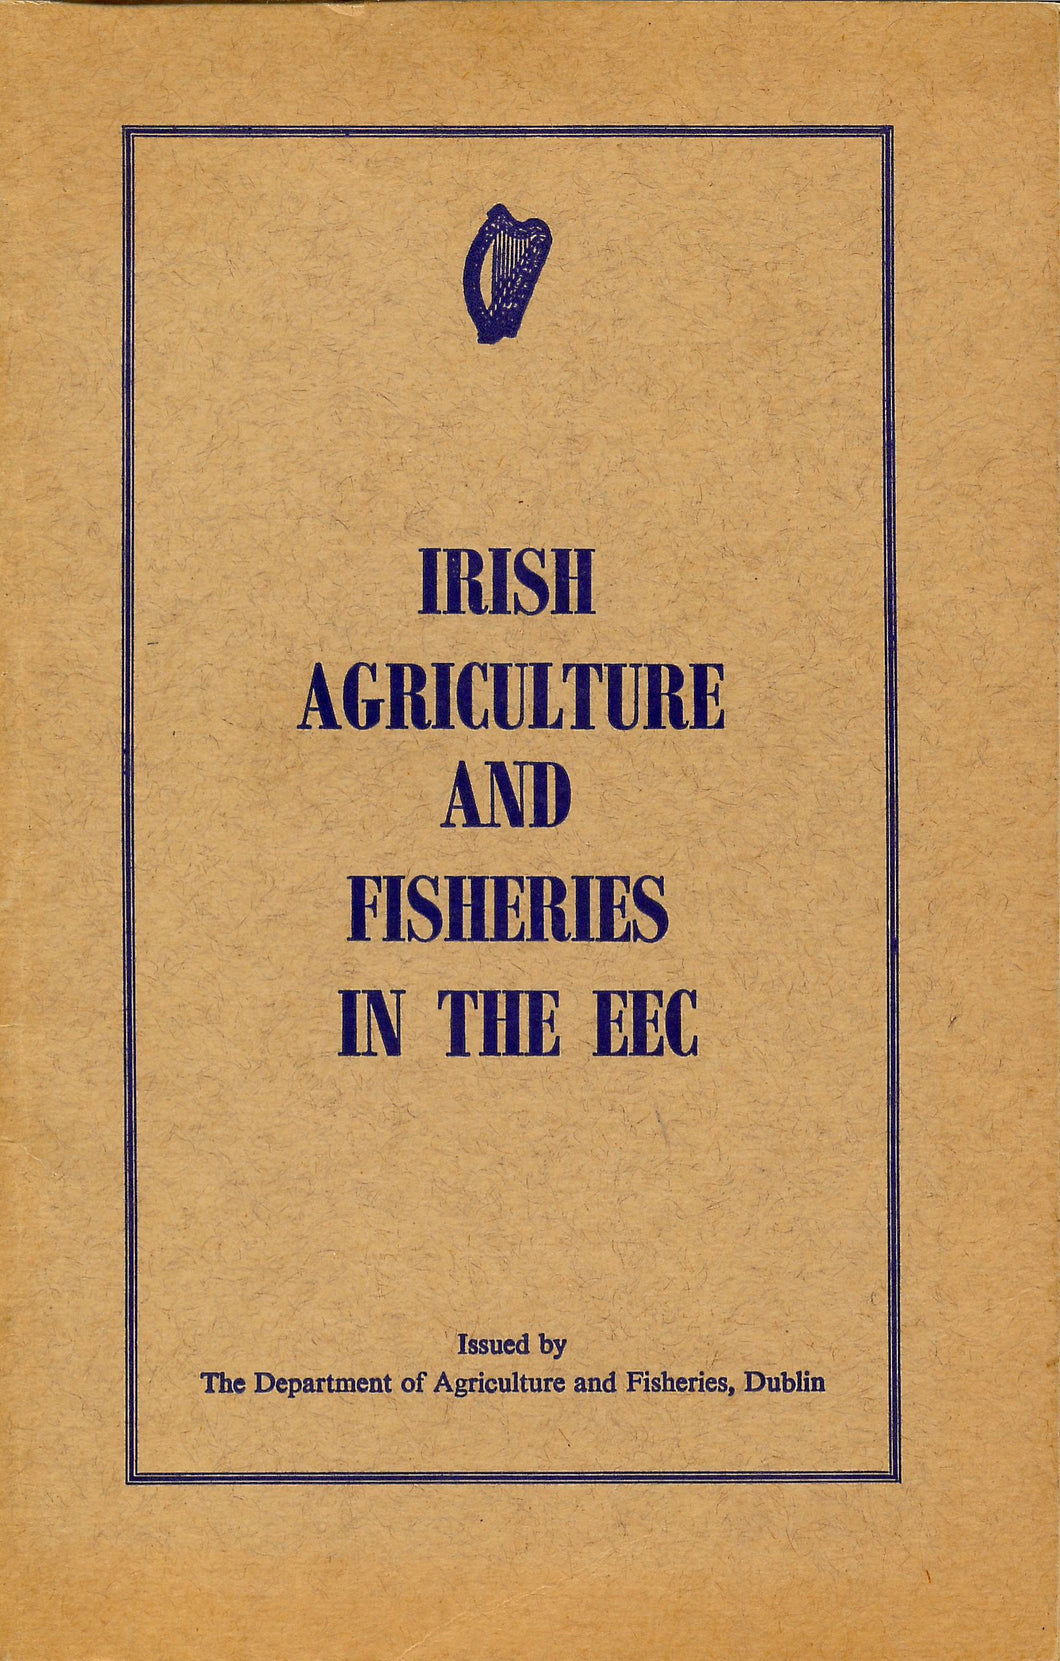 Irish agriculture and fisheries in the EEC